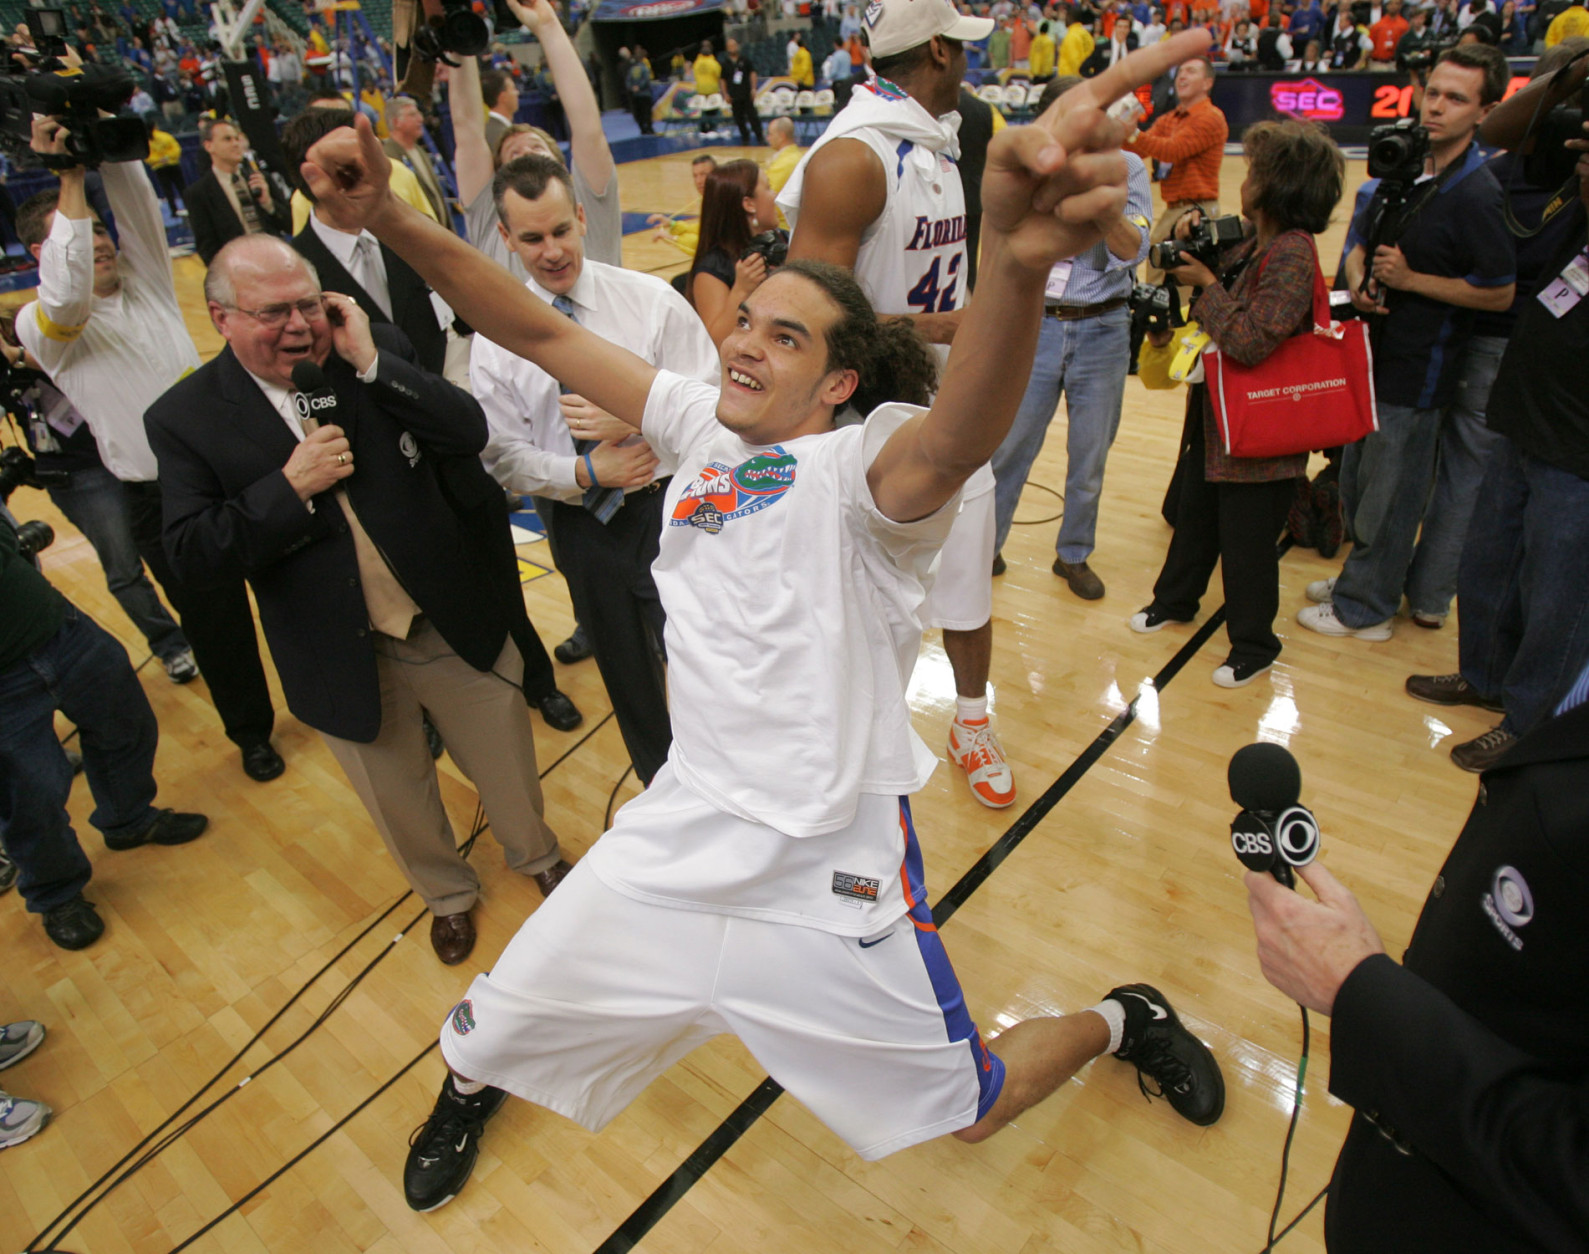 Florida's Joakim Noah reacts to the crowd following a 77-56 win over Arkansas during their Southeastern Conference basketball tournament championship game at the Georgia Dome in Atlanta, Sunday, March 11, 2007. (AP Photo/John Bazemore)